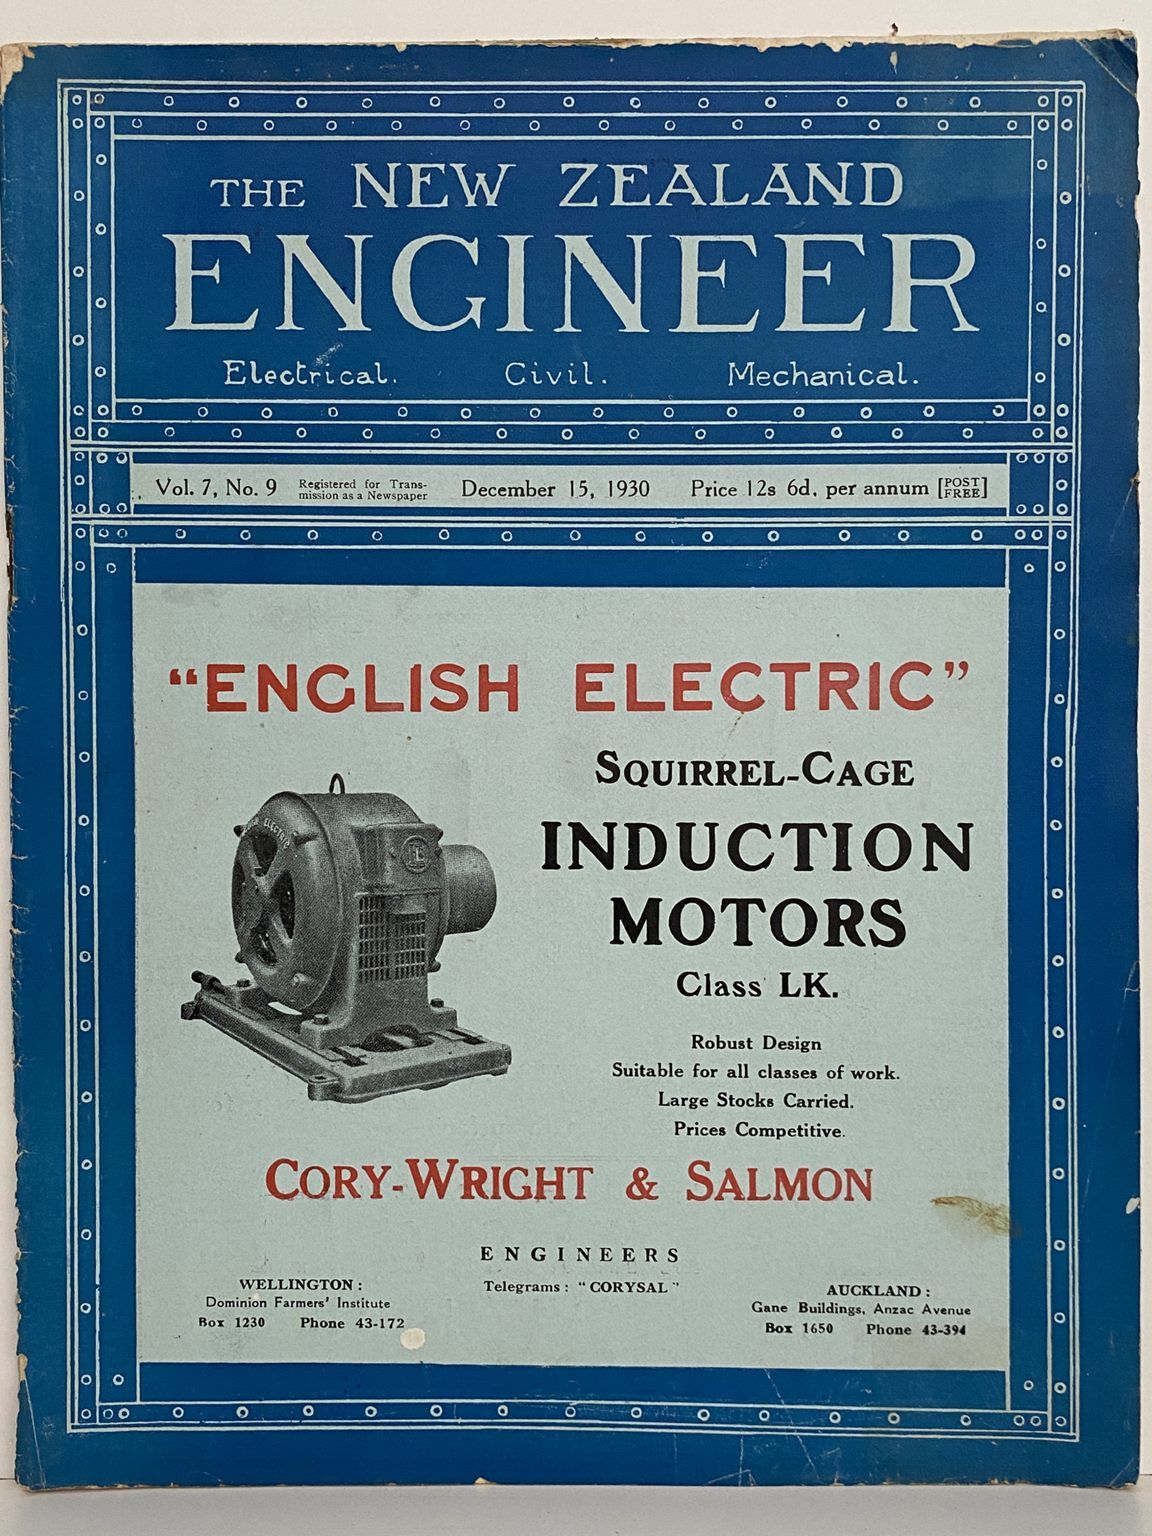 OLD MAGAZINE: The New Zealand Engineer Vol. 7, No. 9 - 15 December 1930